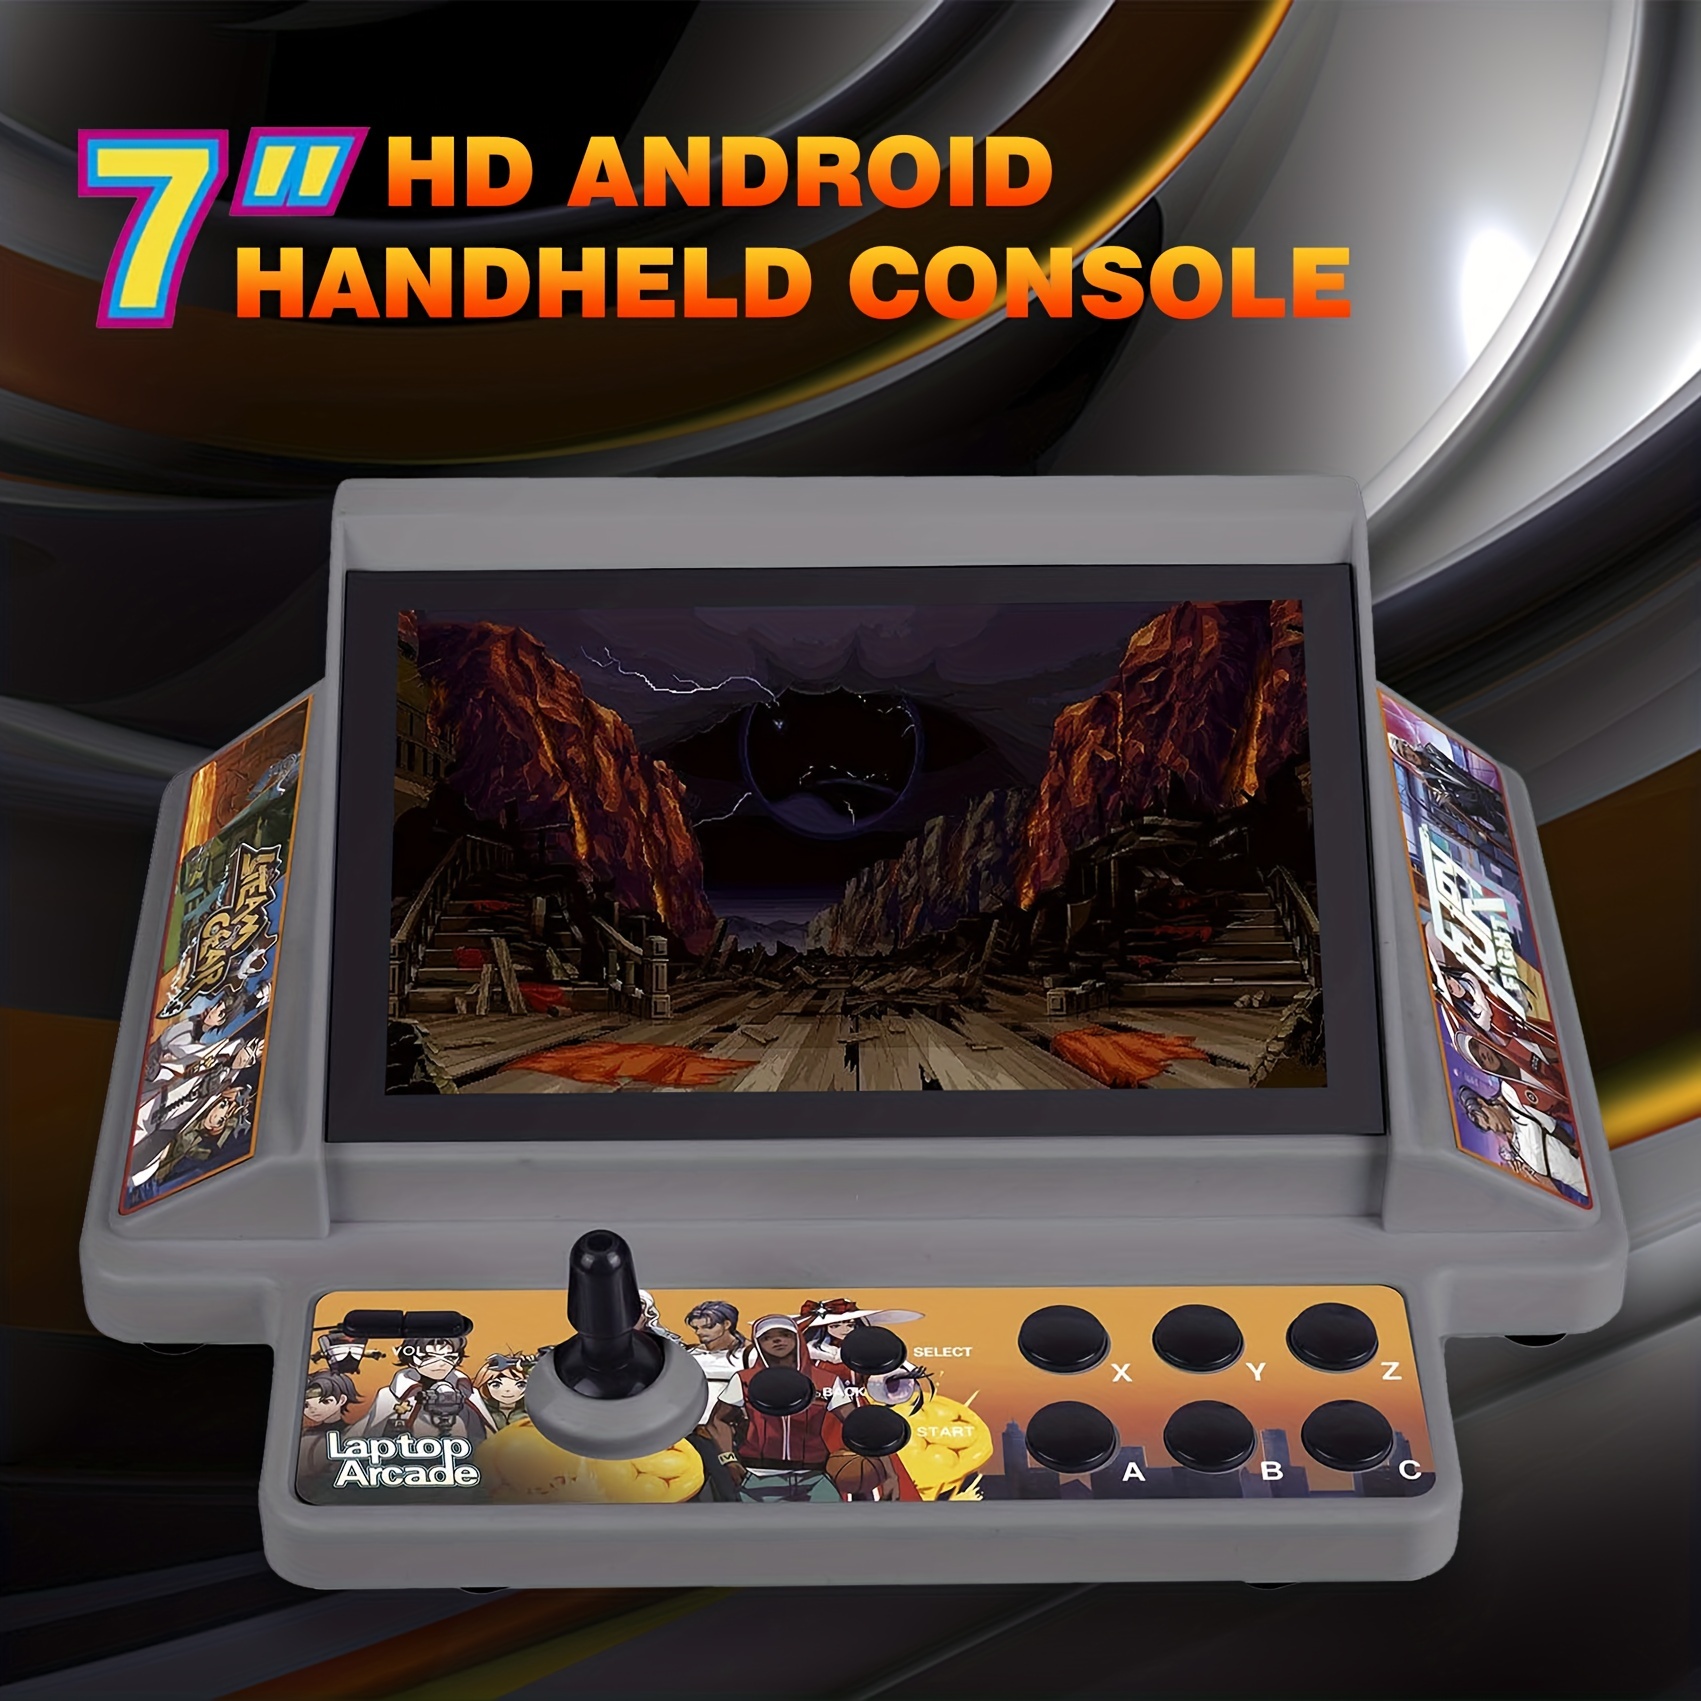 7 Inch HD Android Arcade Game Console with 4000MA LI ION Battery & Video Plug Play Handheld Portable